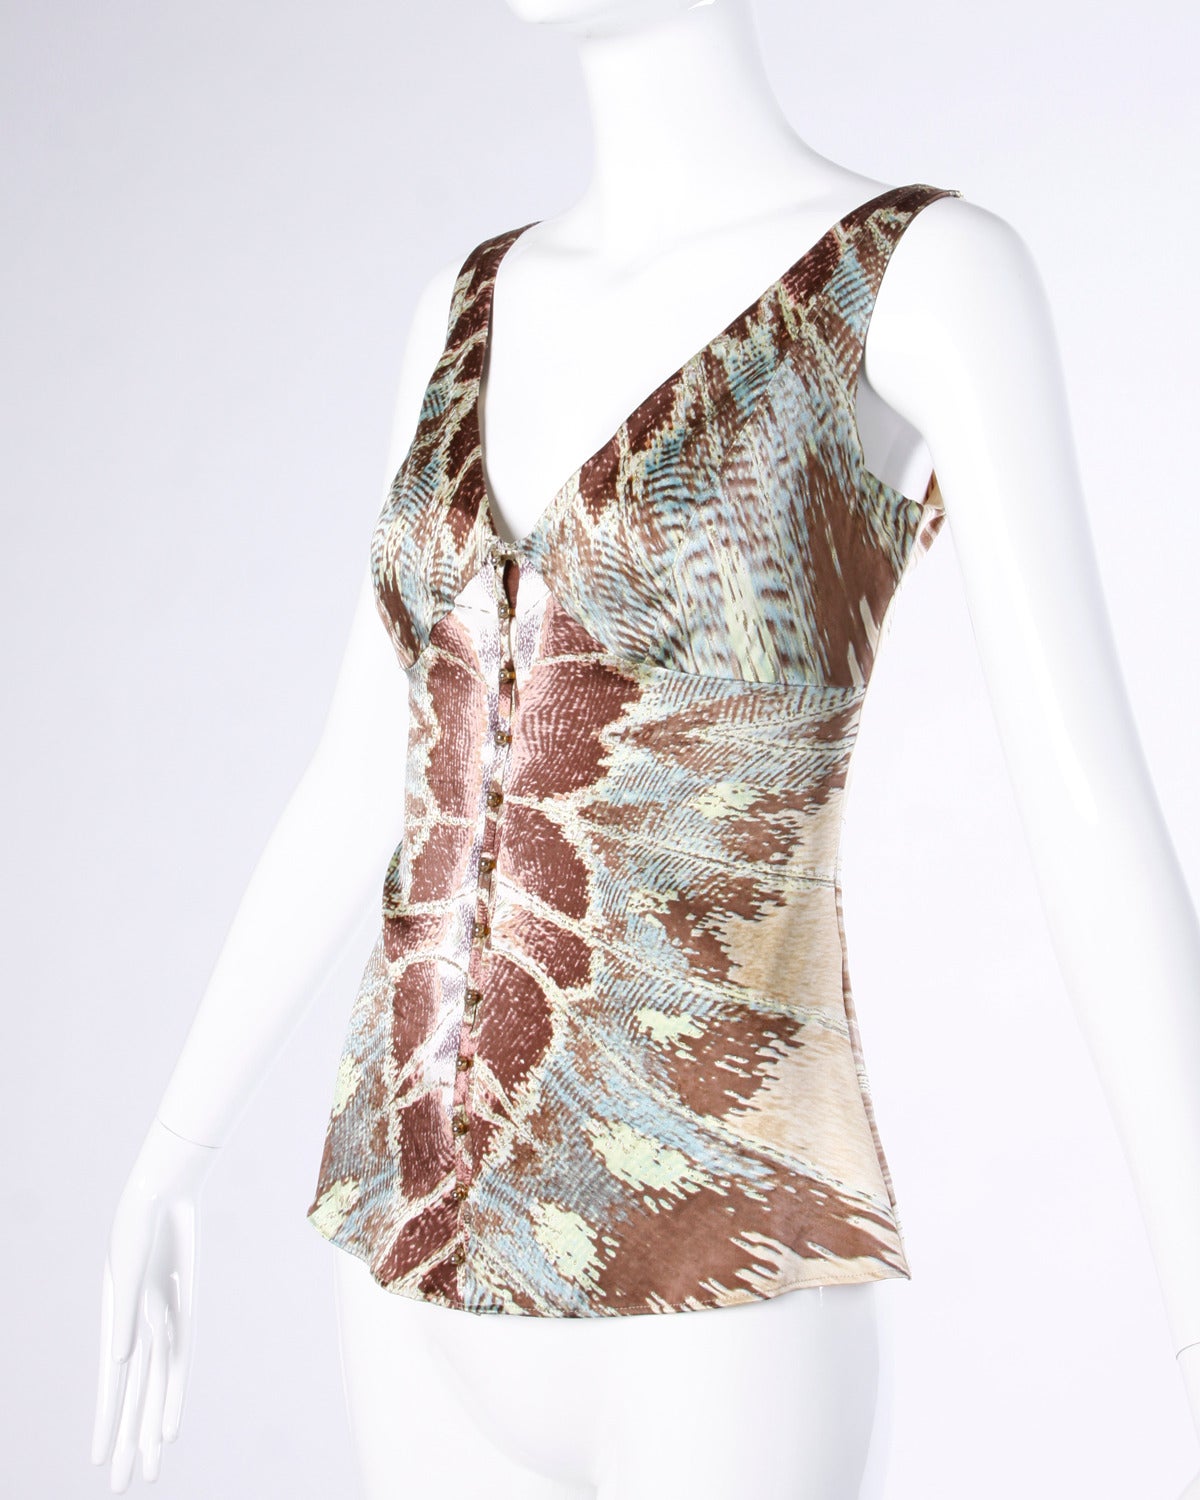 Gorgeous Roberto Cavalli silk tank top with a mirror snake print on the front and a diagonal striped print on the back.

Details:

Partially Lined
Front Hook Closure
Marked Size: Large
Color: Gold/ Brown/ Blue/ Green
Fabric: Silk